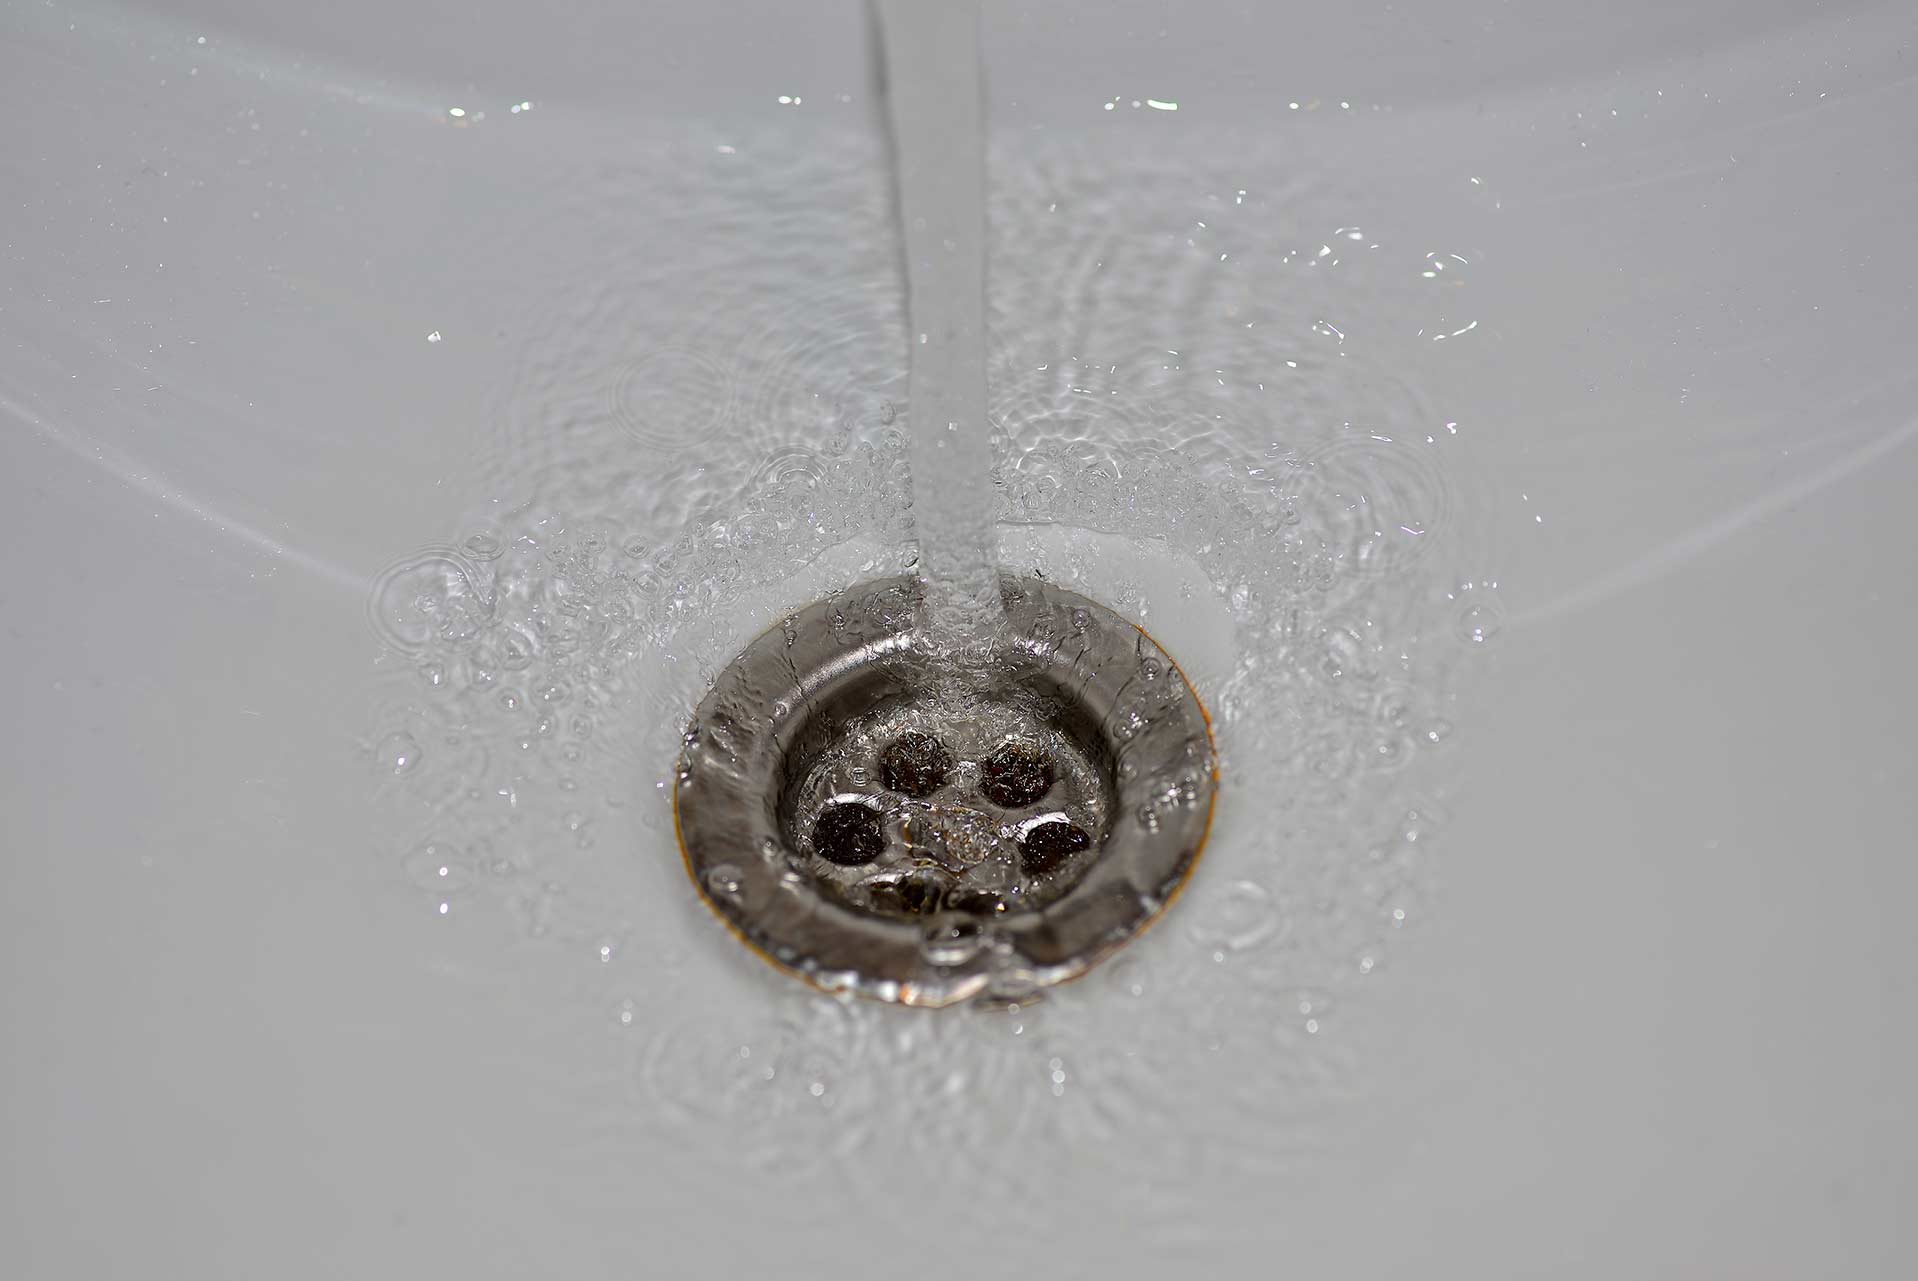 A2B Drains provides services to unblock blocked sinks and drains for properties in Tilehurst.